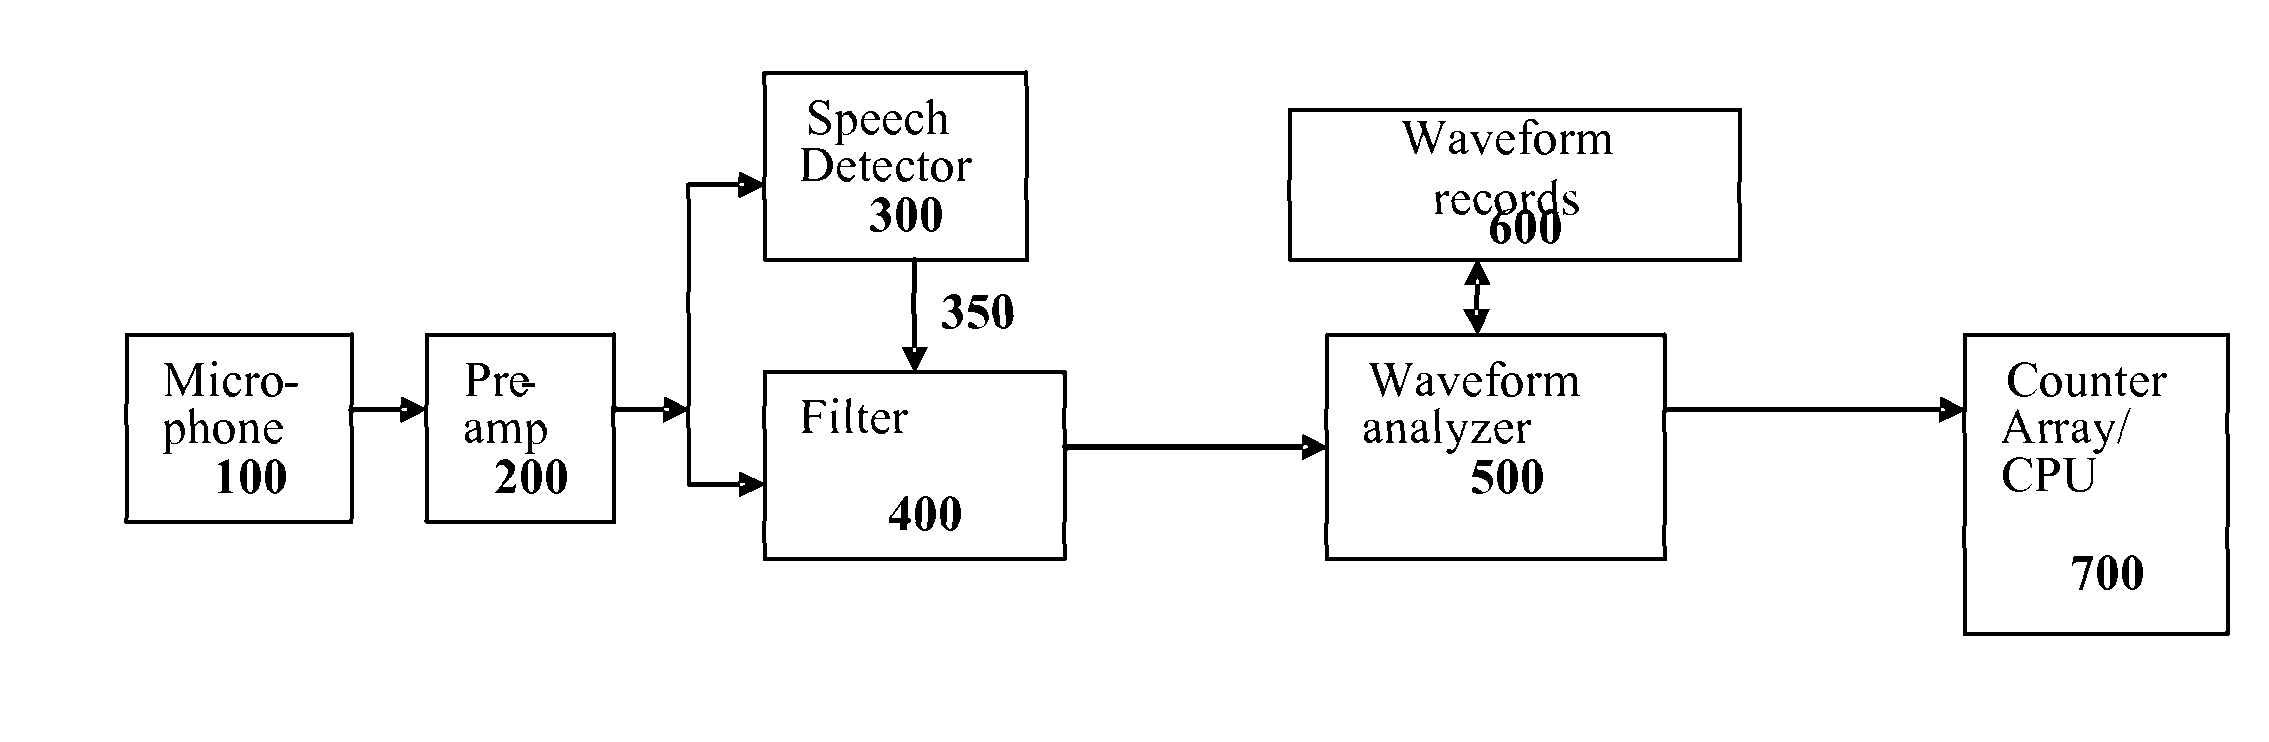 Identifying activity in an area utilizing sound detection and comparison